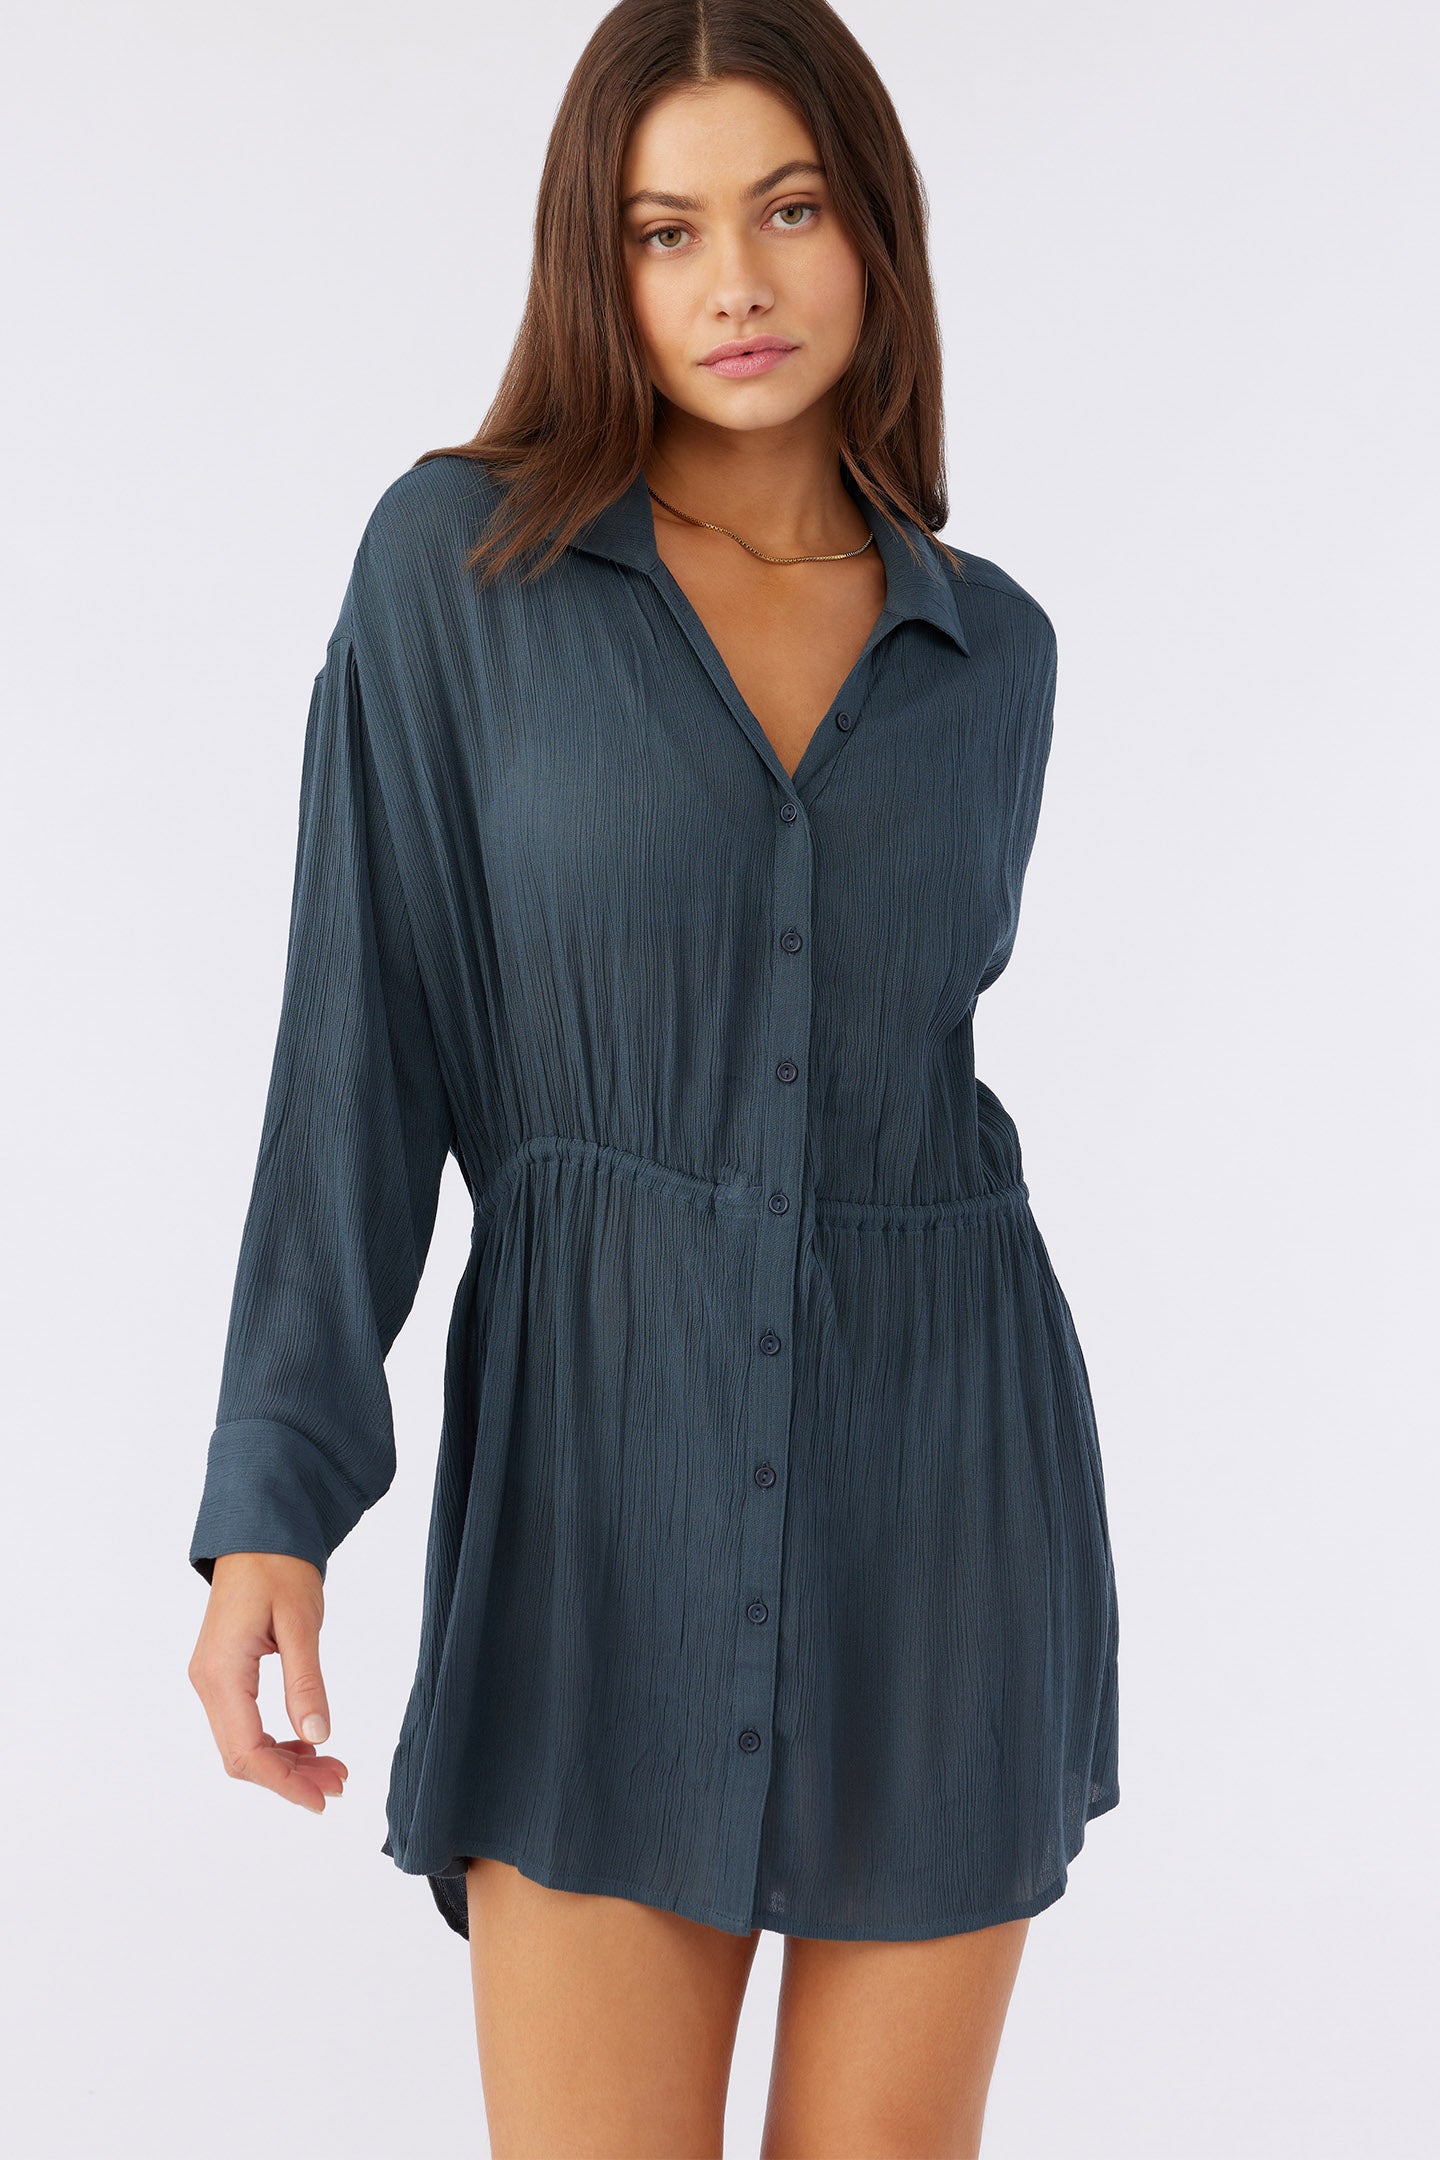 Saltwater Solids Cami Cover-Up Tunic - Slate | O'Neill